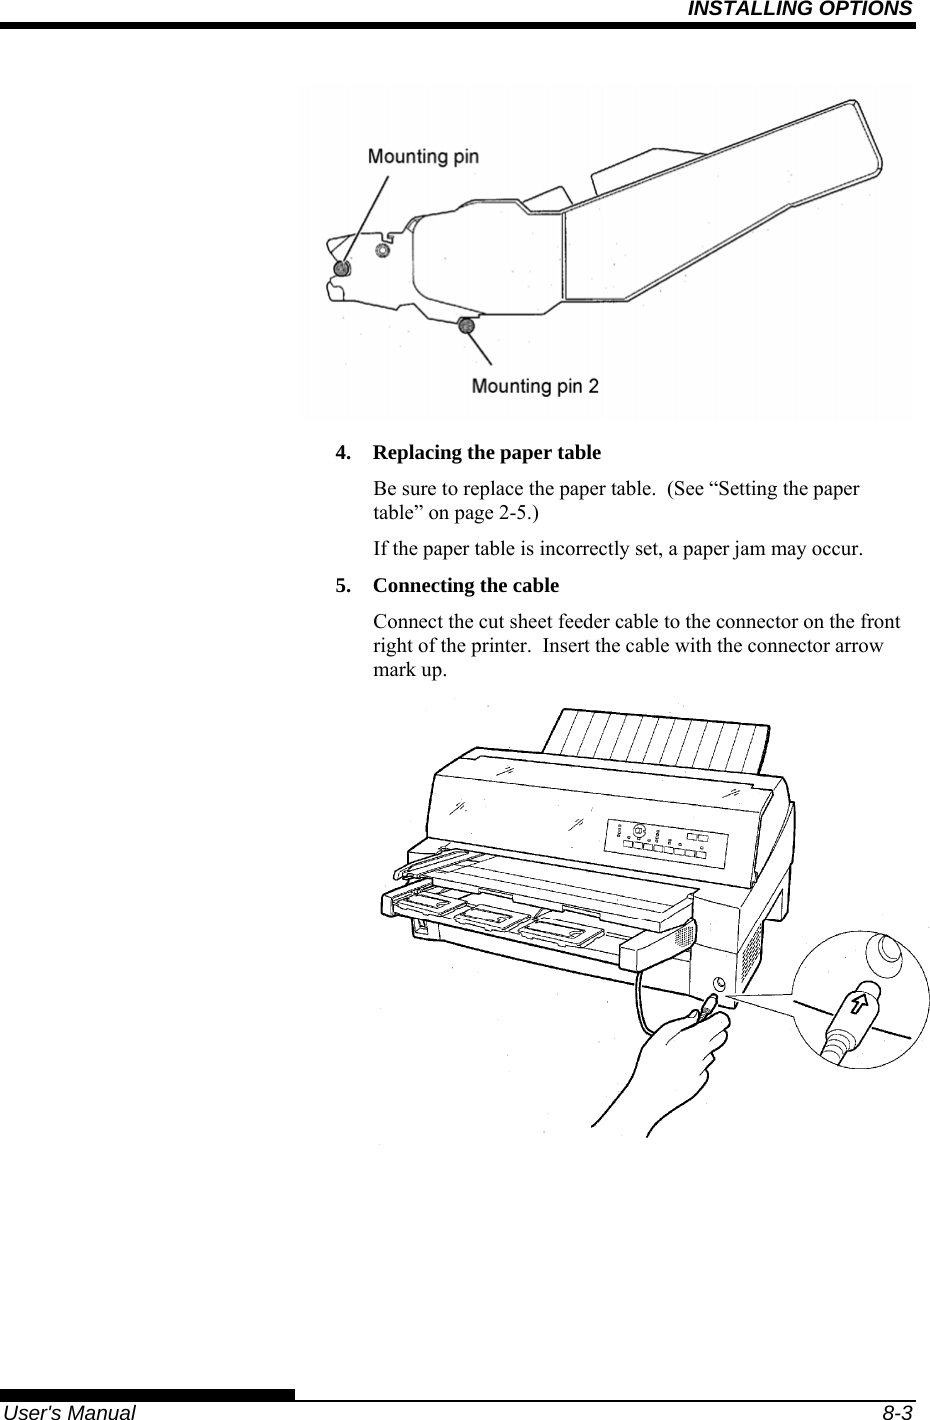 INSTALLING OPTIONS   User&apos;s Manual  8-3  4.  Replacing the paper table Be sure to replace the paper table.  (See “Setting the paper table” on page 2-5.) If the paper table is incorrectly set, a paper jam may occur. 5.  Connecting the cable Connect the cut sheet feeder cable to the connector on the front right of the printer.  Insert the cable with the connector arrow mark up.  